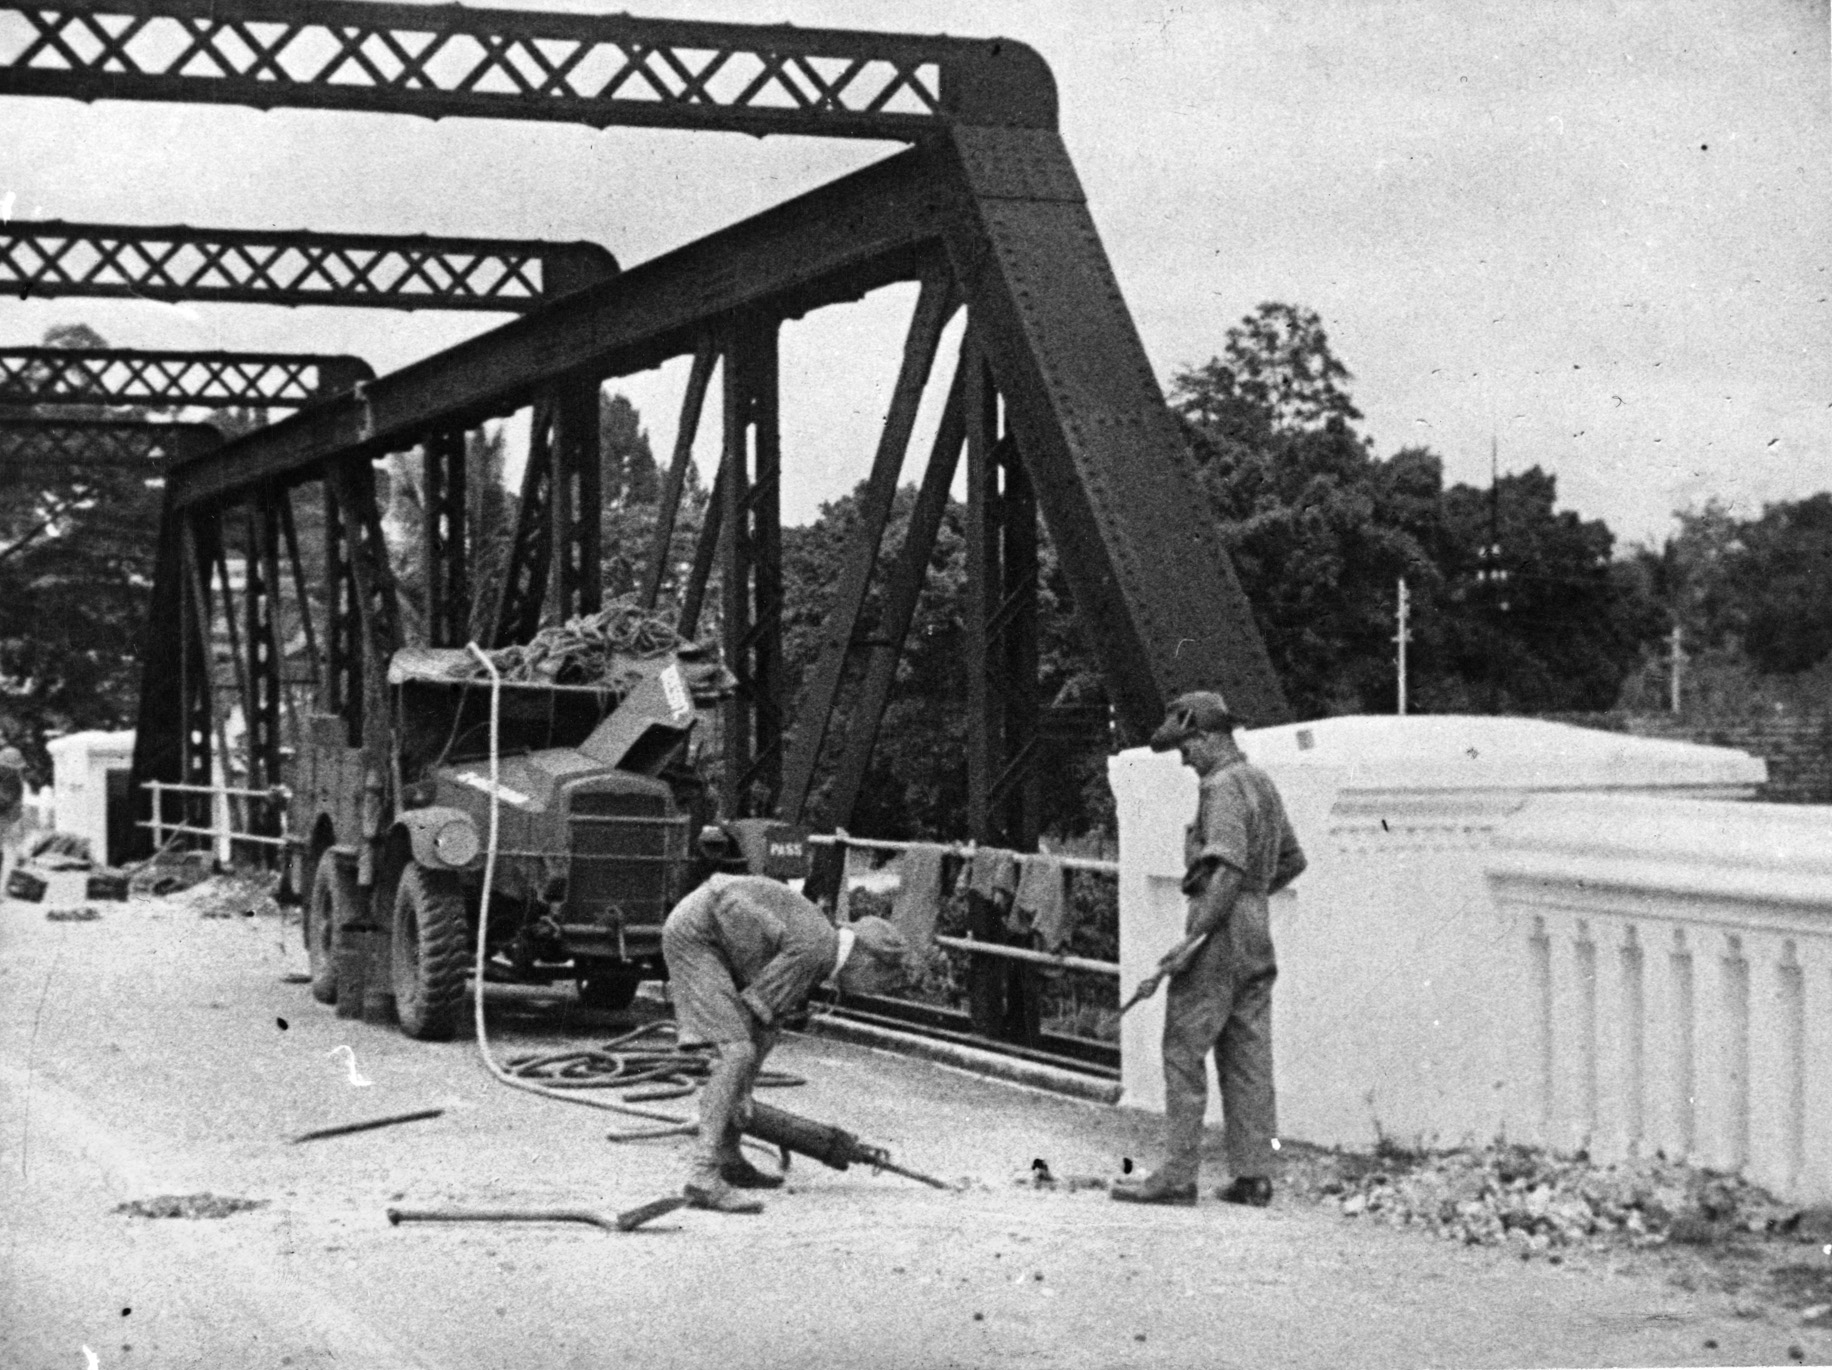 In preparation for the coming Japanese onslaught, British sappers lay explosive charges to destroy a bridge at Seremban along a probable route of enemy advance near Kuala Lumpur in late 1941. 